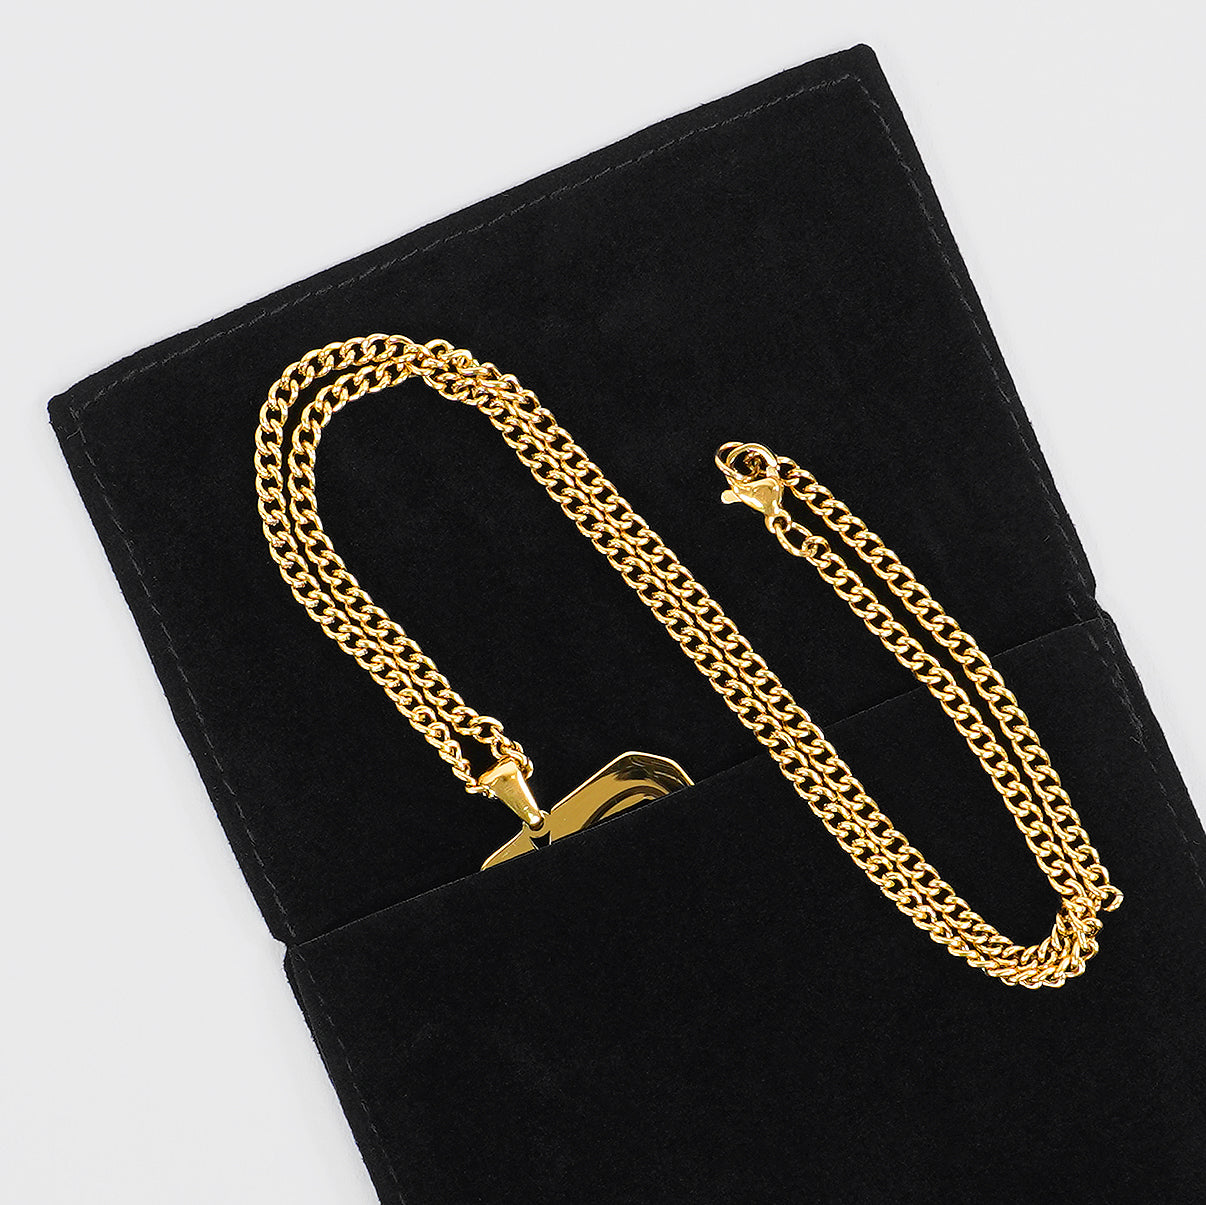 47 Number Pendant with Chain Necklace - Gold Plated Stainless Steel